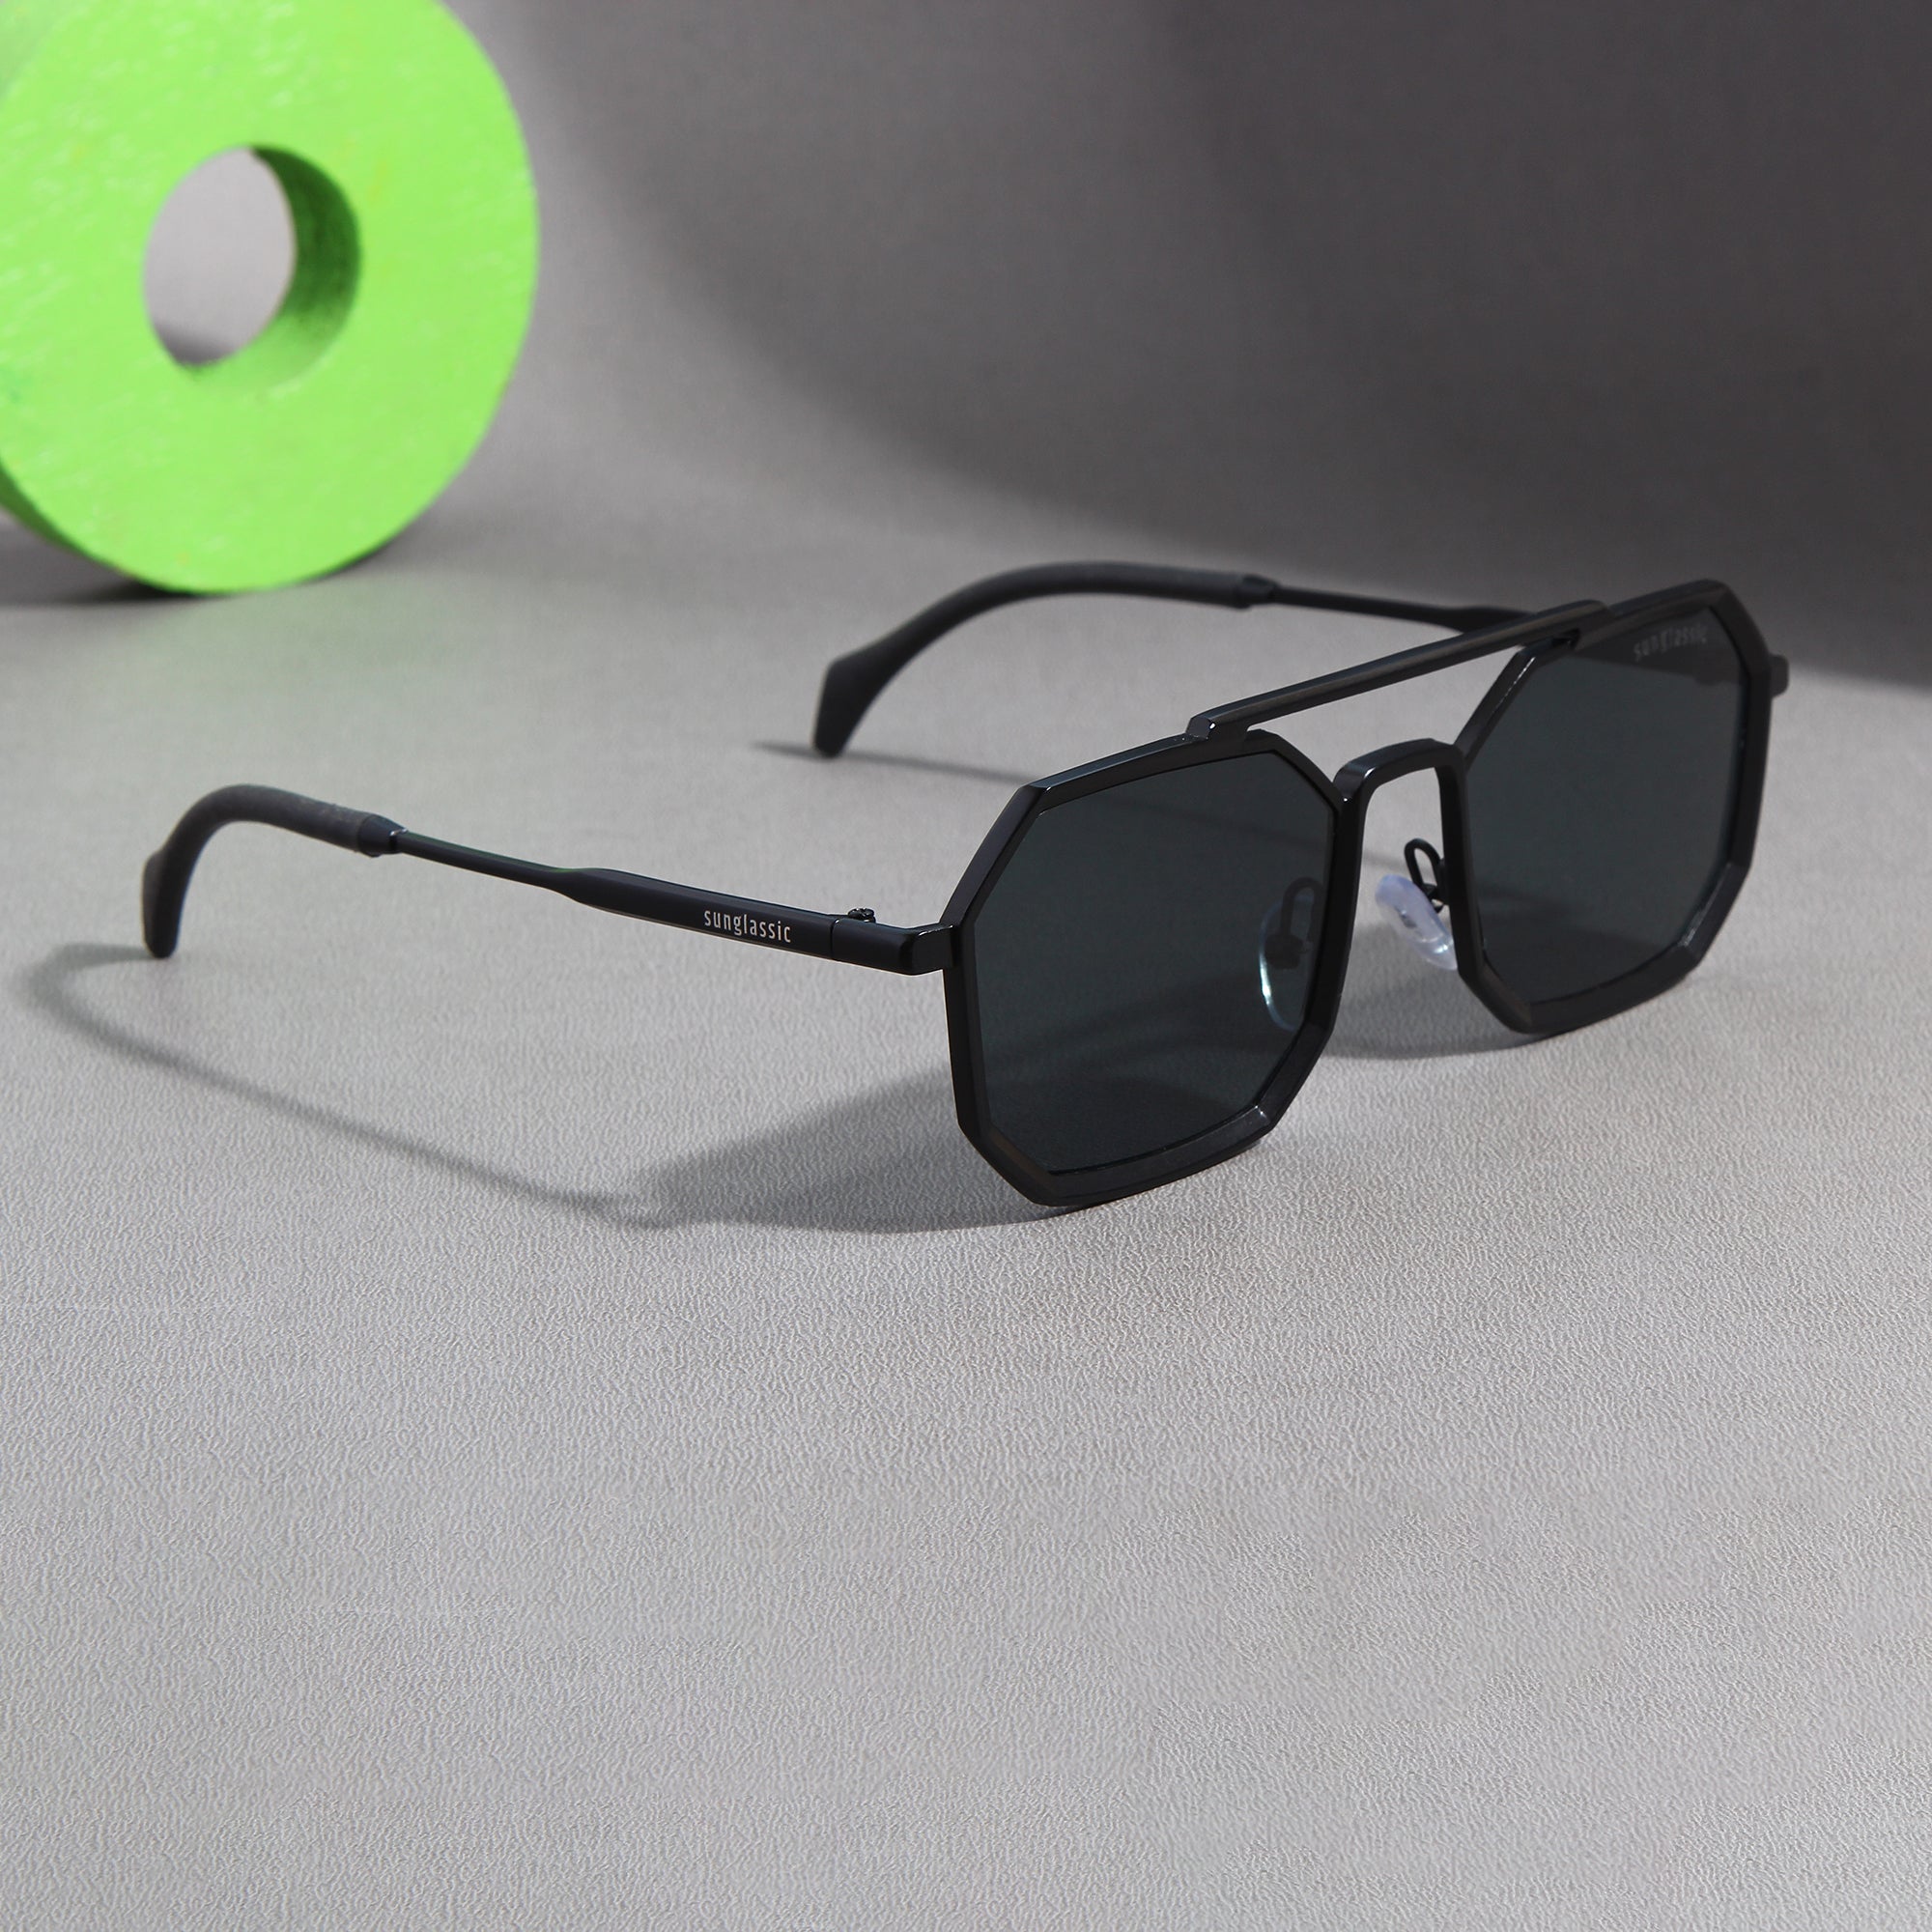 Sunglasses with a stylish octagonal shape and black lenses.